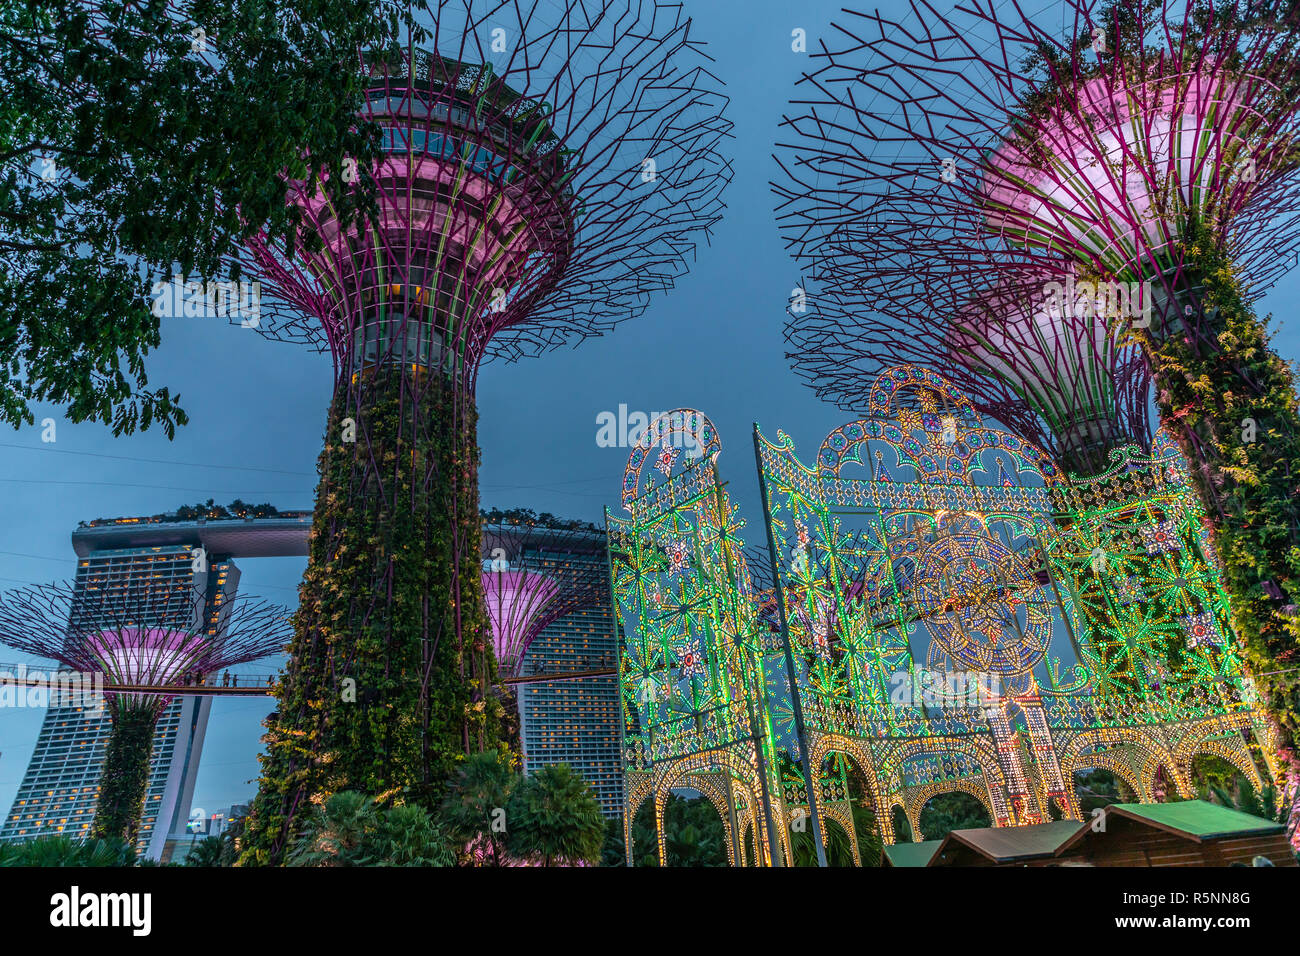 Christmas lights at Gardens by the Bay, Singapore Stock Photo